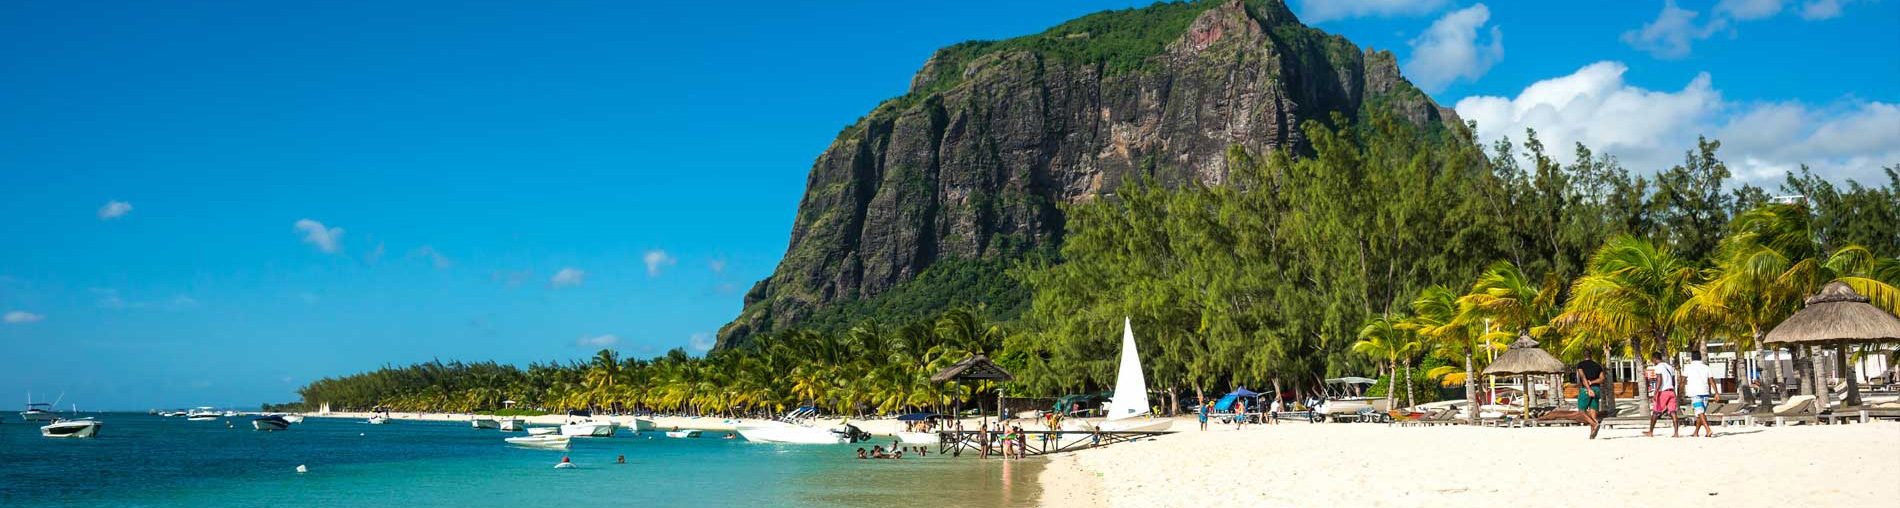 Most Popular Mauritius Tour Packages